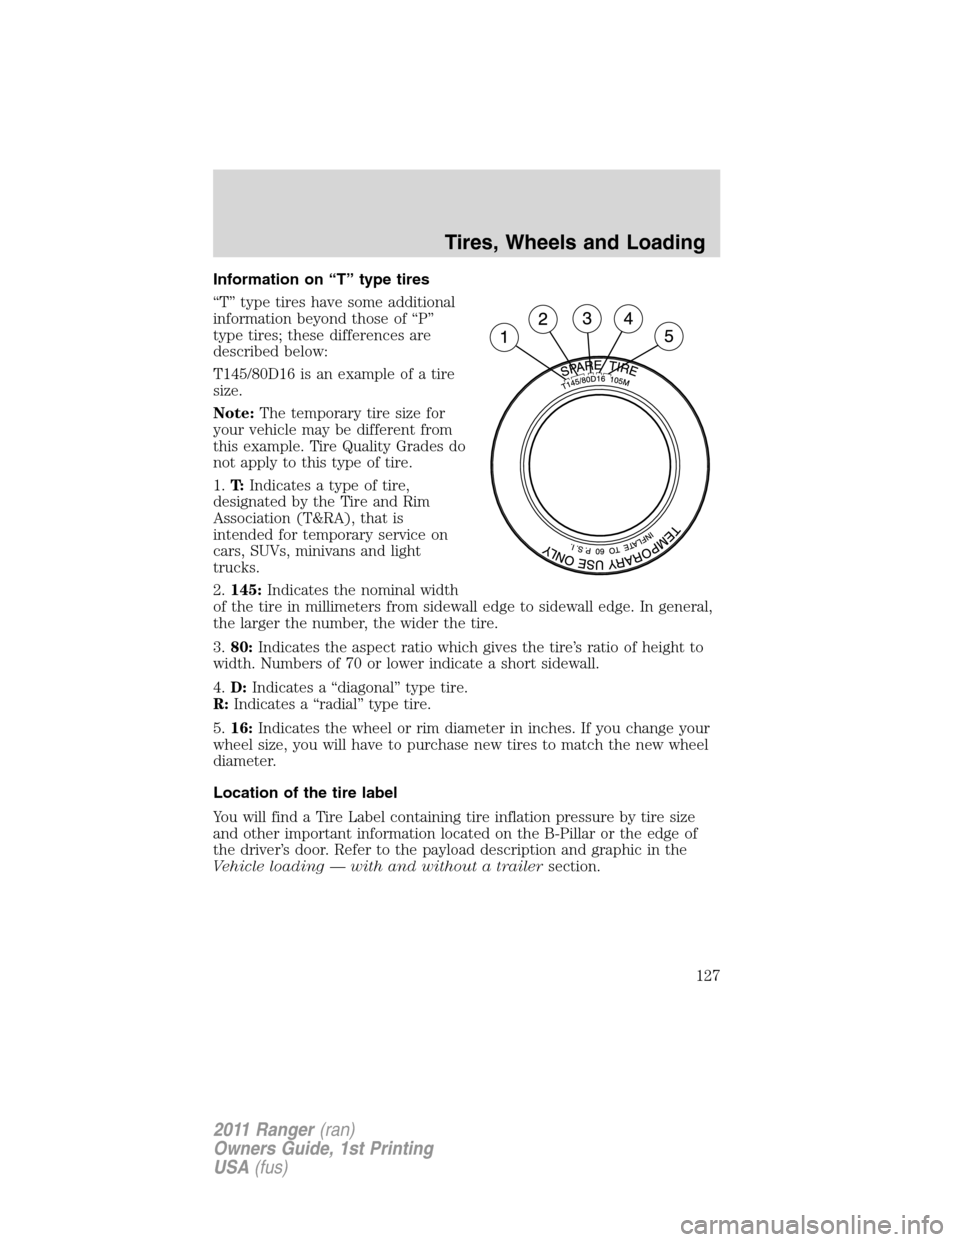 FORD RANGER 2011 2.G Owners Manual Information on “T” type tires
“T” type tires have some additional
information beyond those of “P”
type tires; these differences are
described below:
T145/80D16 is an example of a tire
size